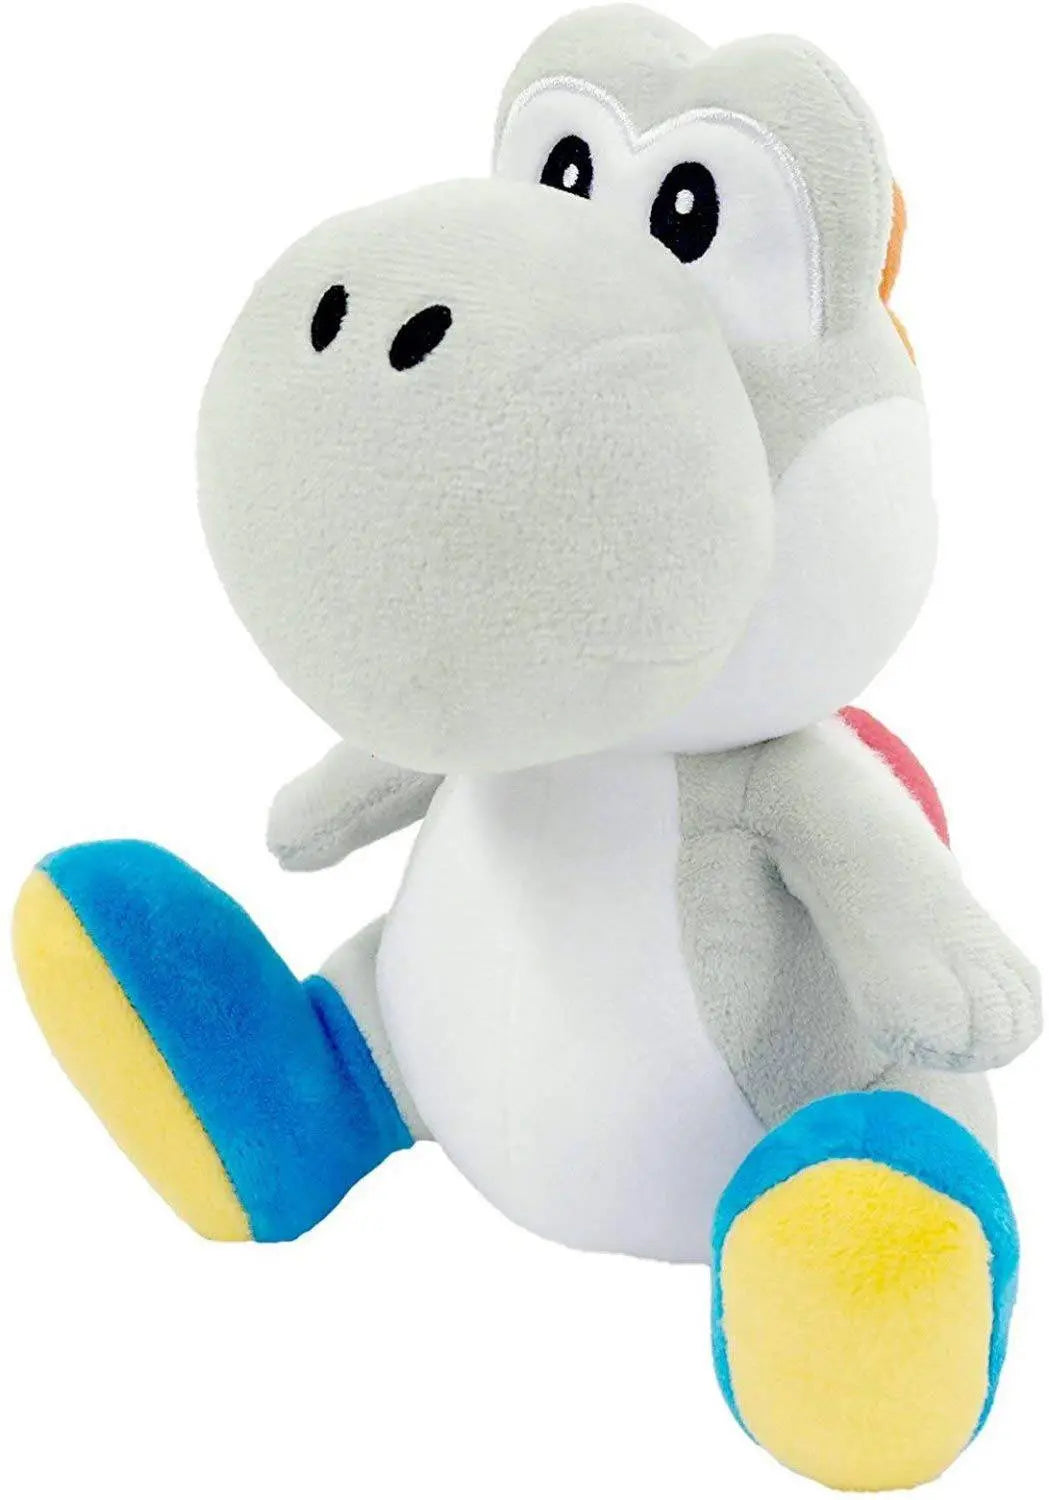 Little Buddy Super Mario All Star Collection 7" White Yoshi Plush King Gaming